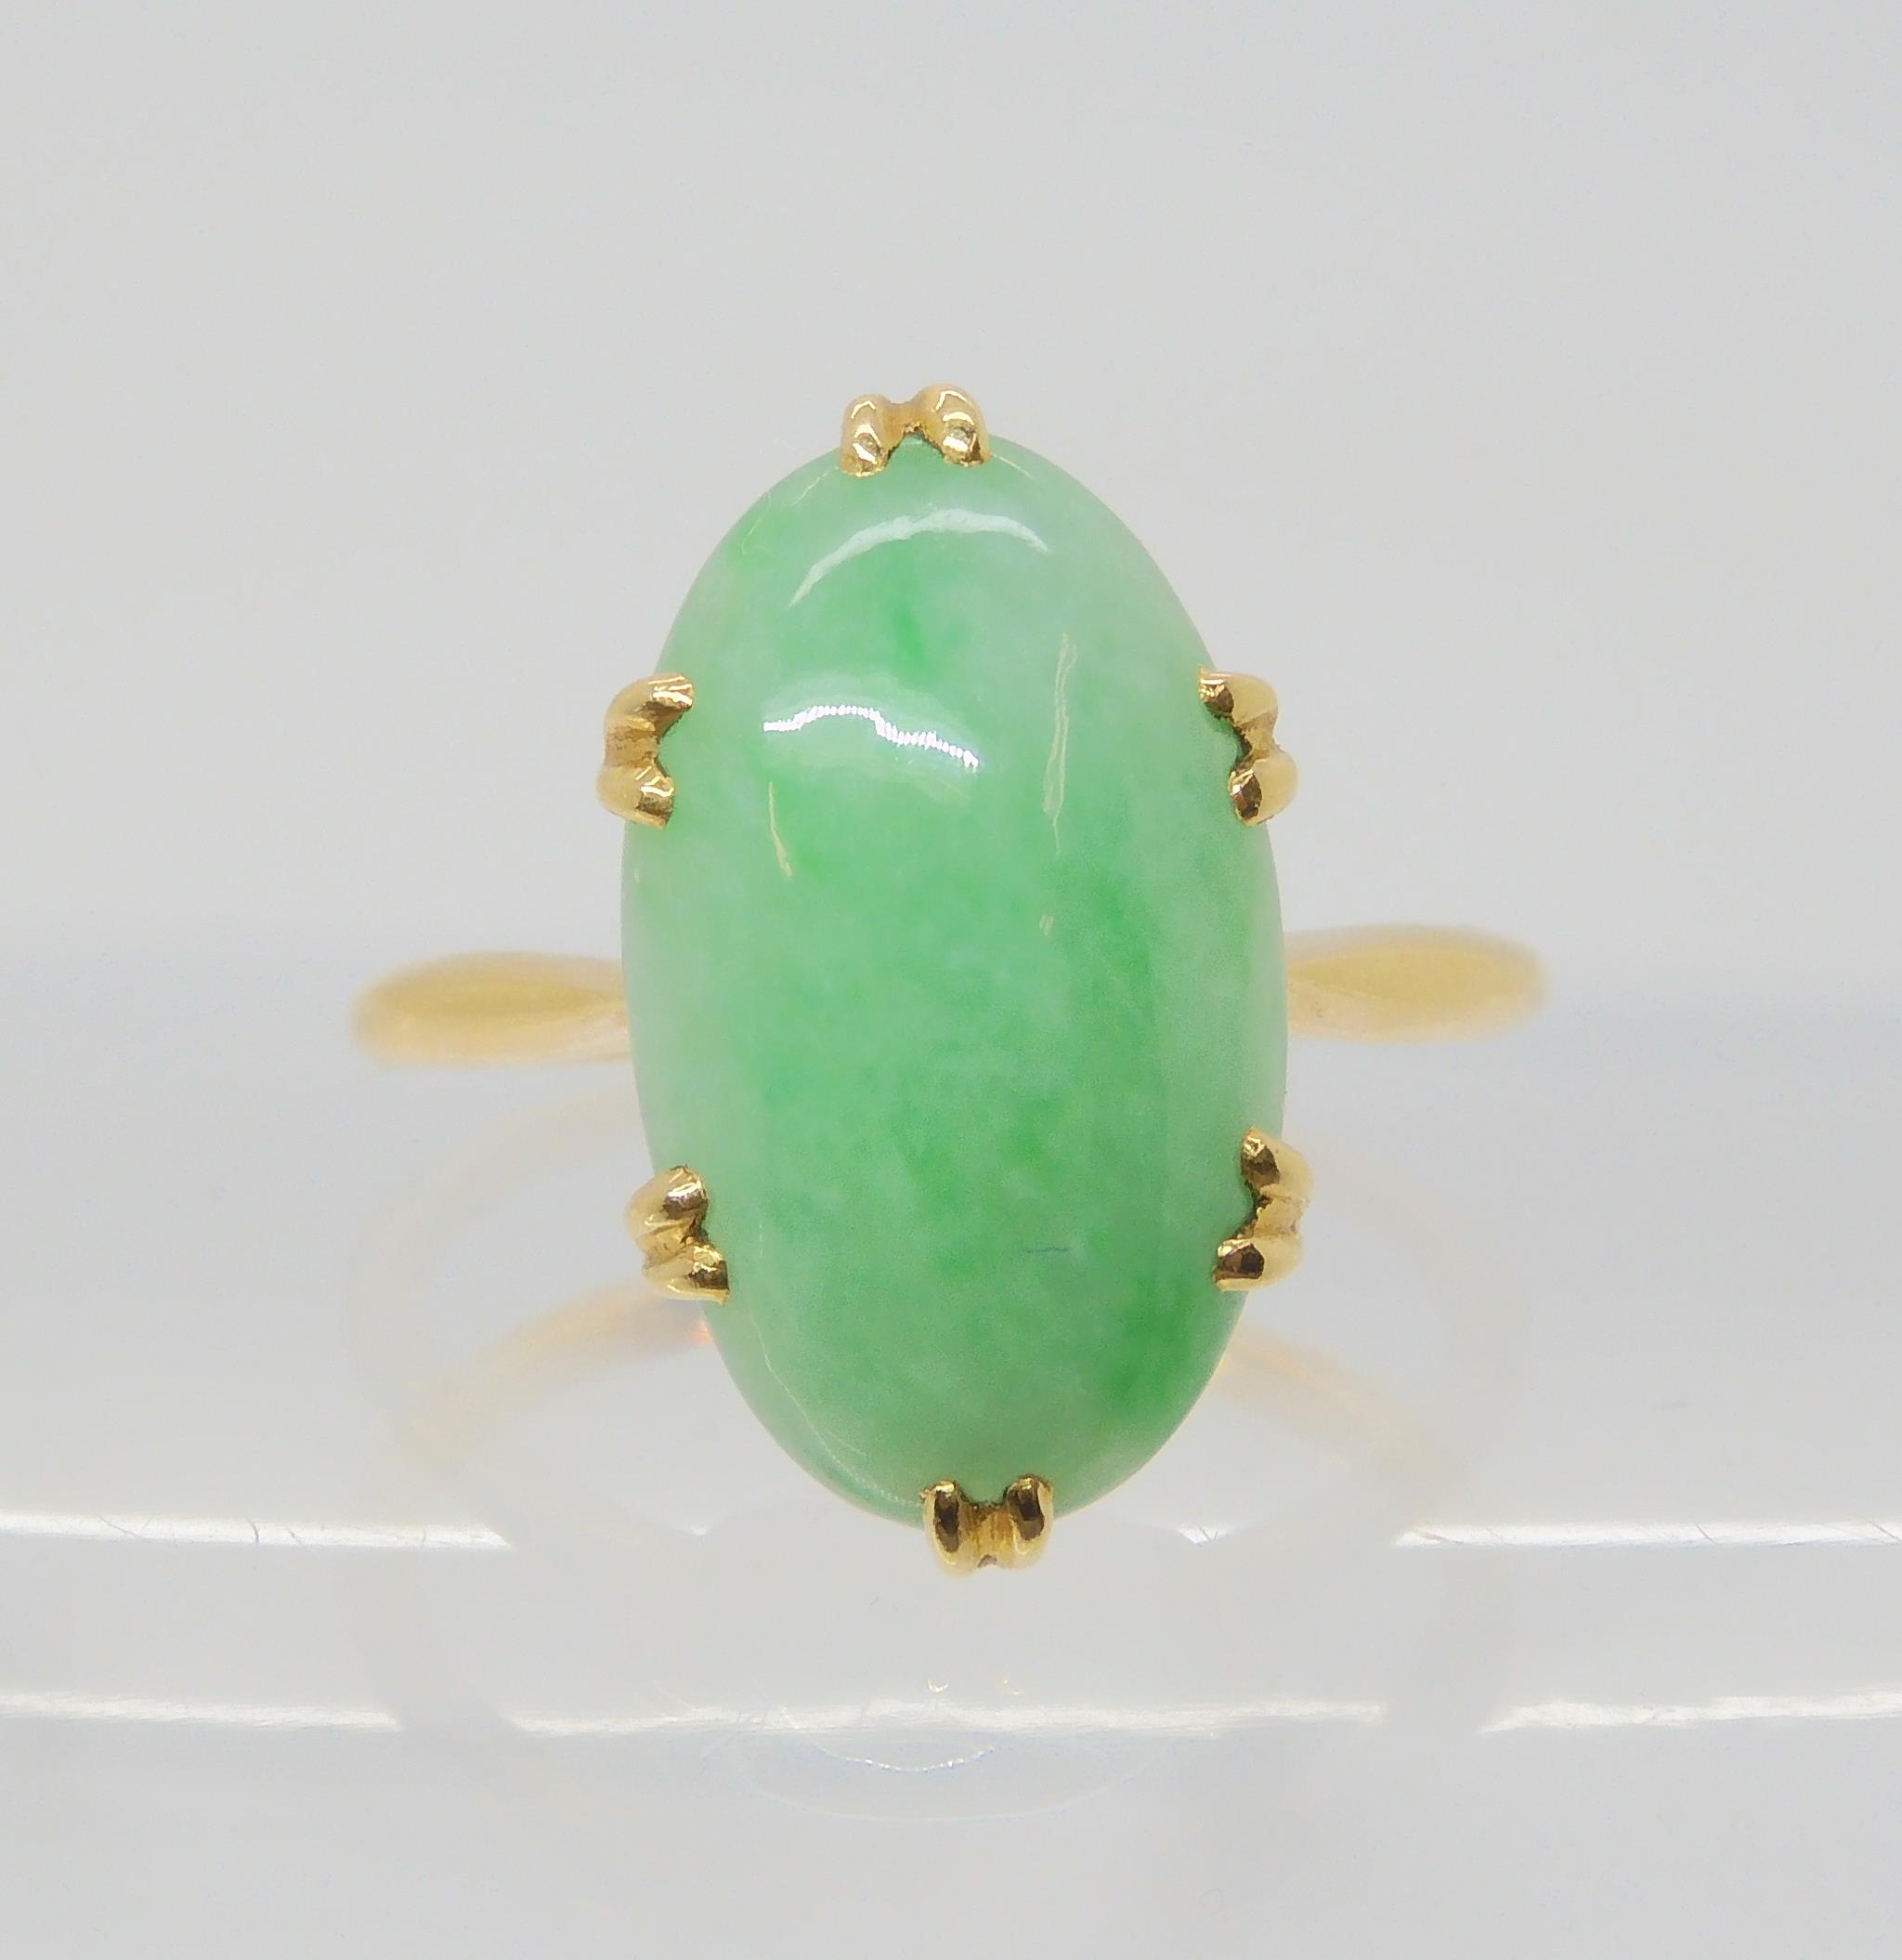 A CHINESE GREEN HARDSTONE RING mounted in bright yellow metal, the hardstone measures approx 16mm